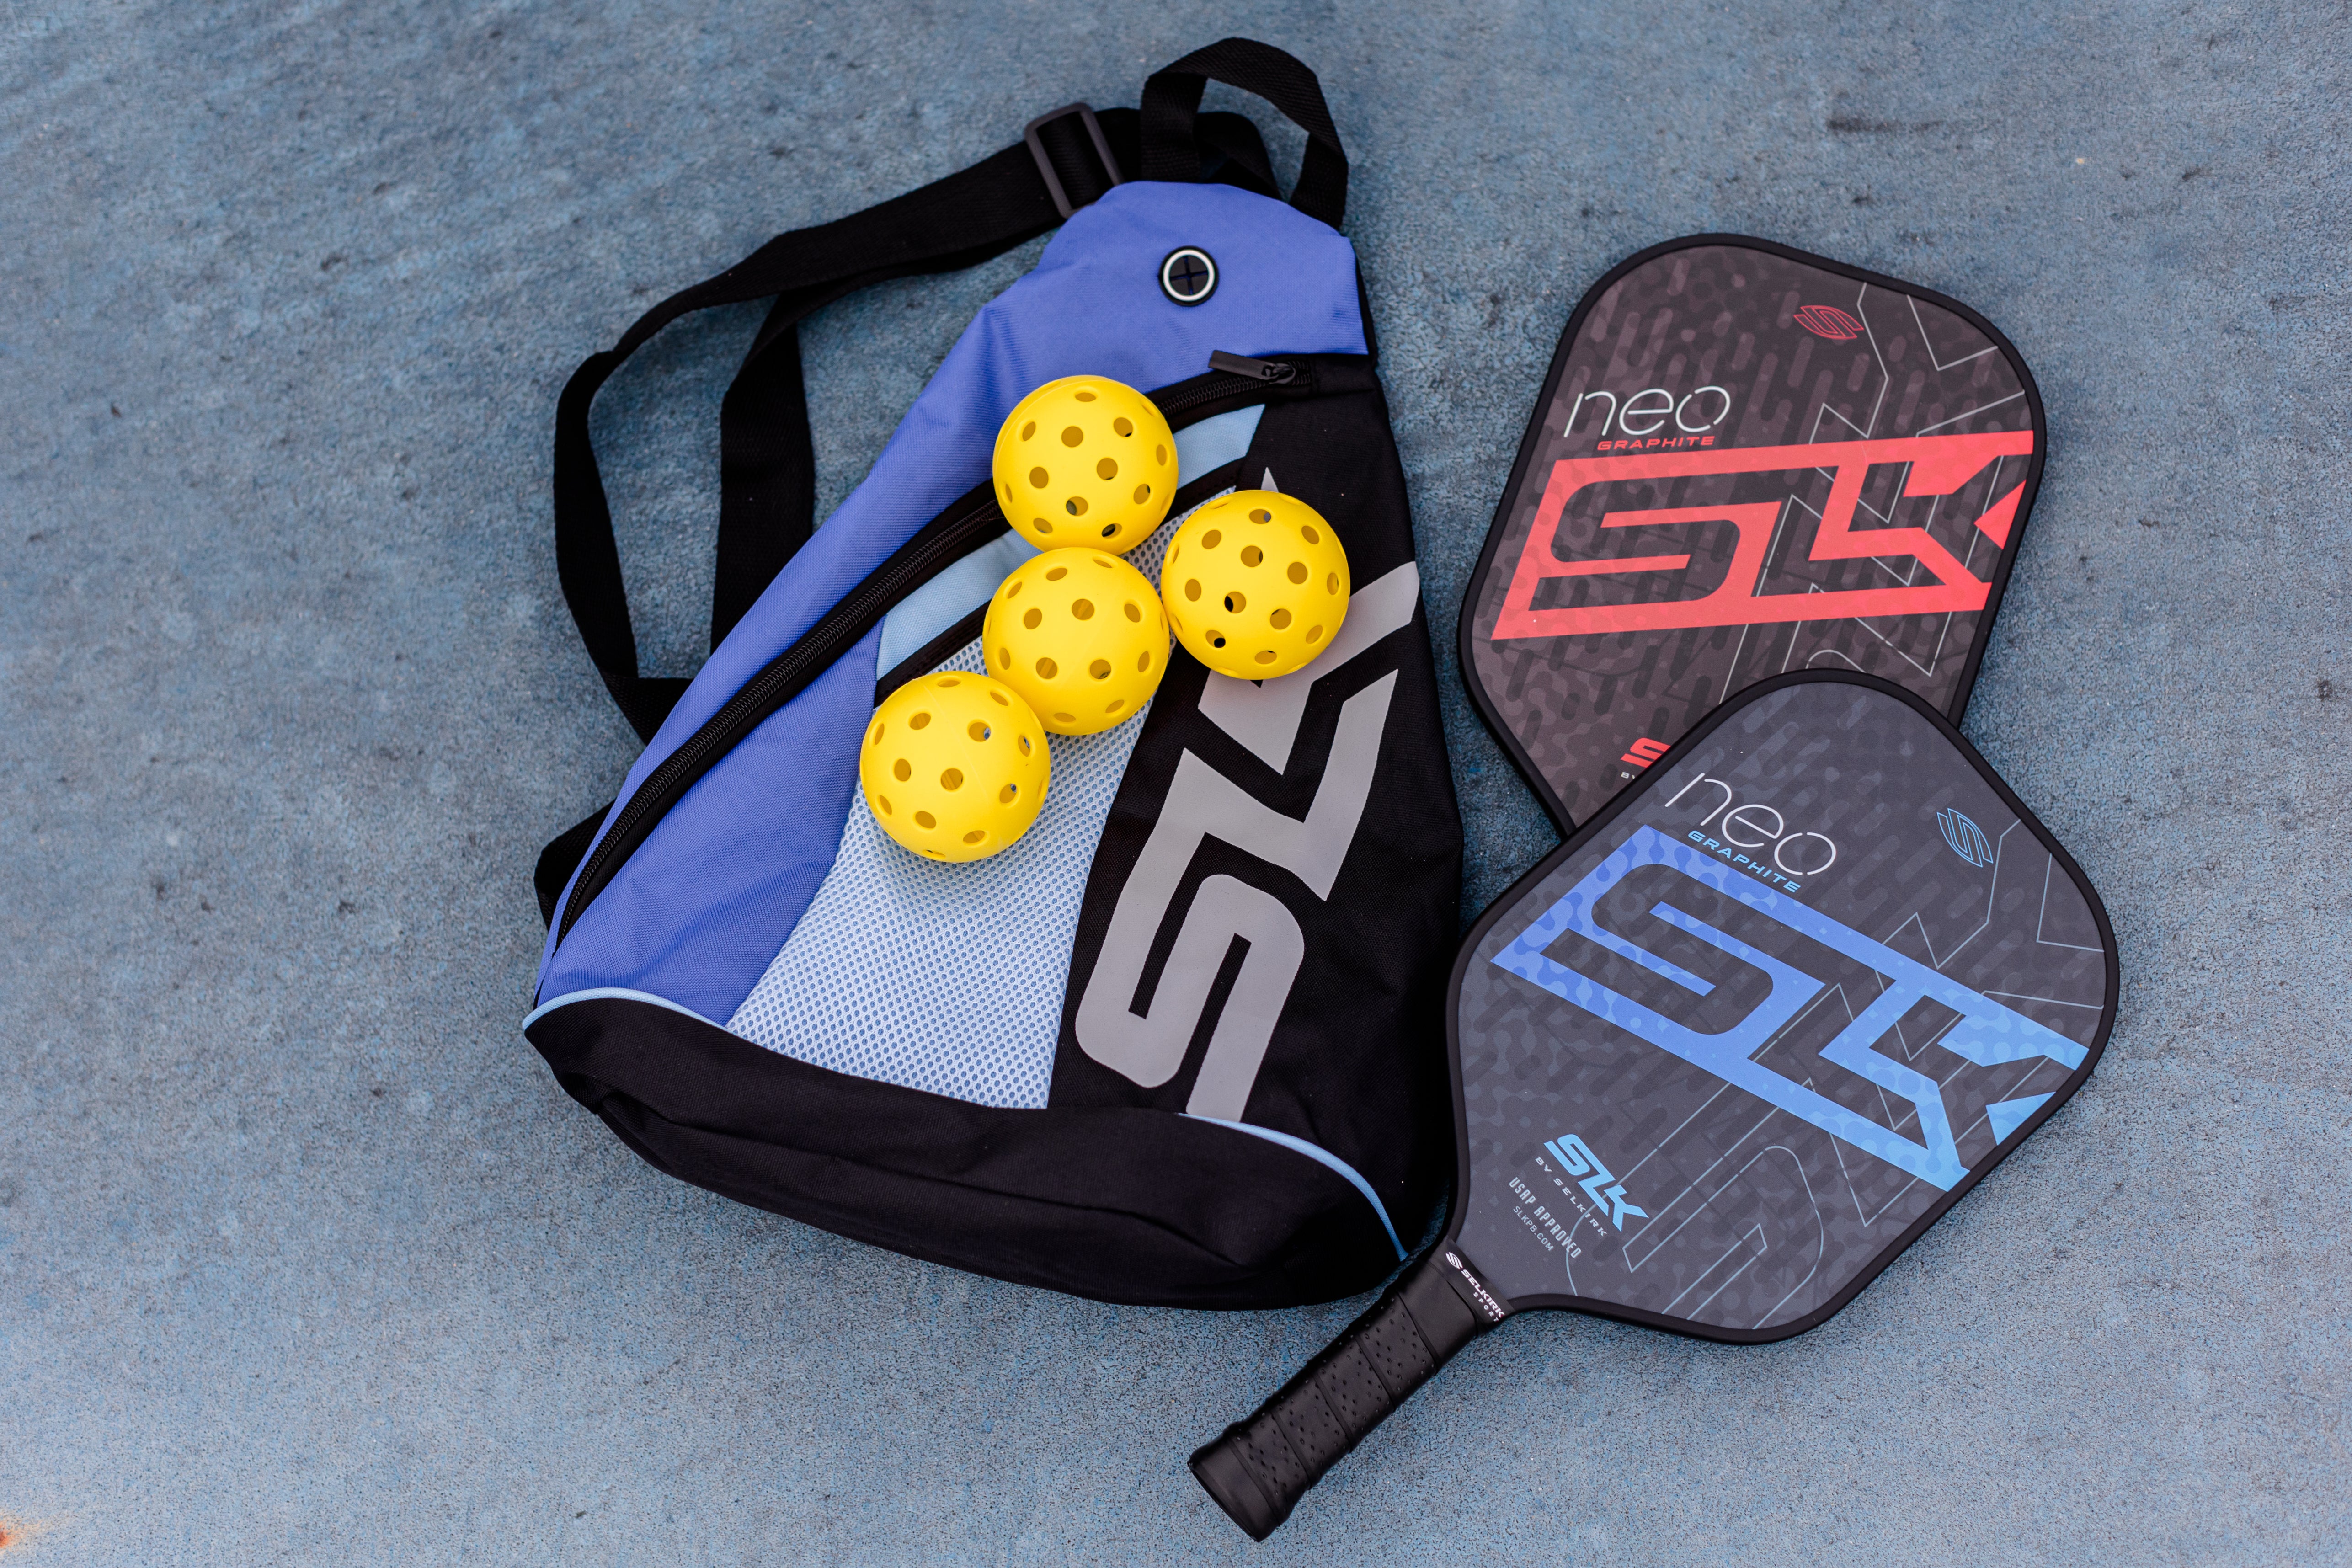 The best pickleball paddle sets for beginners